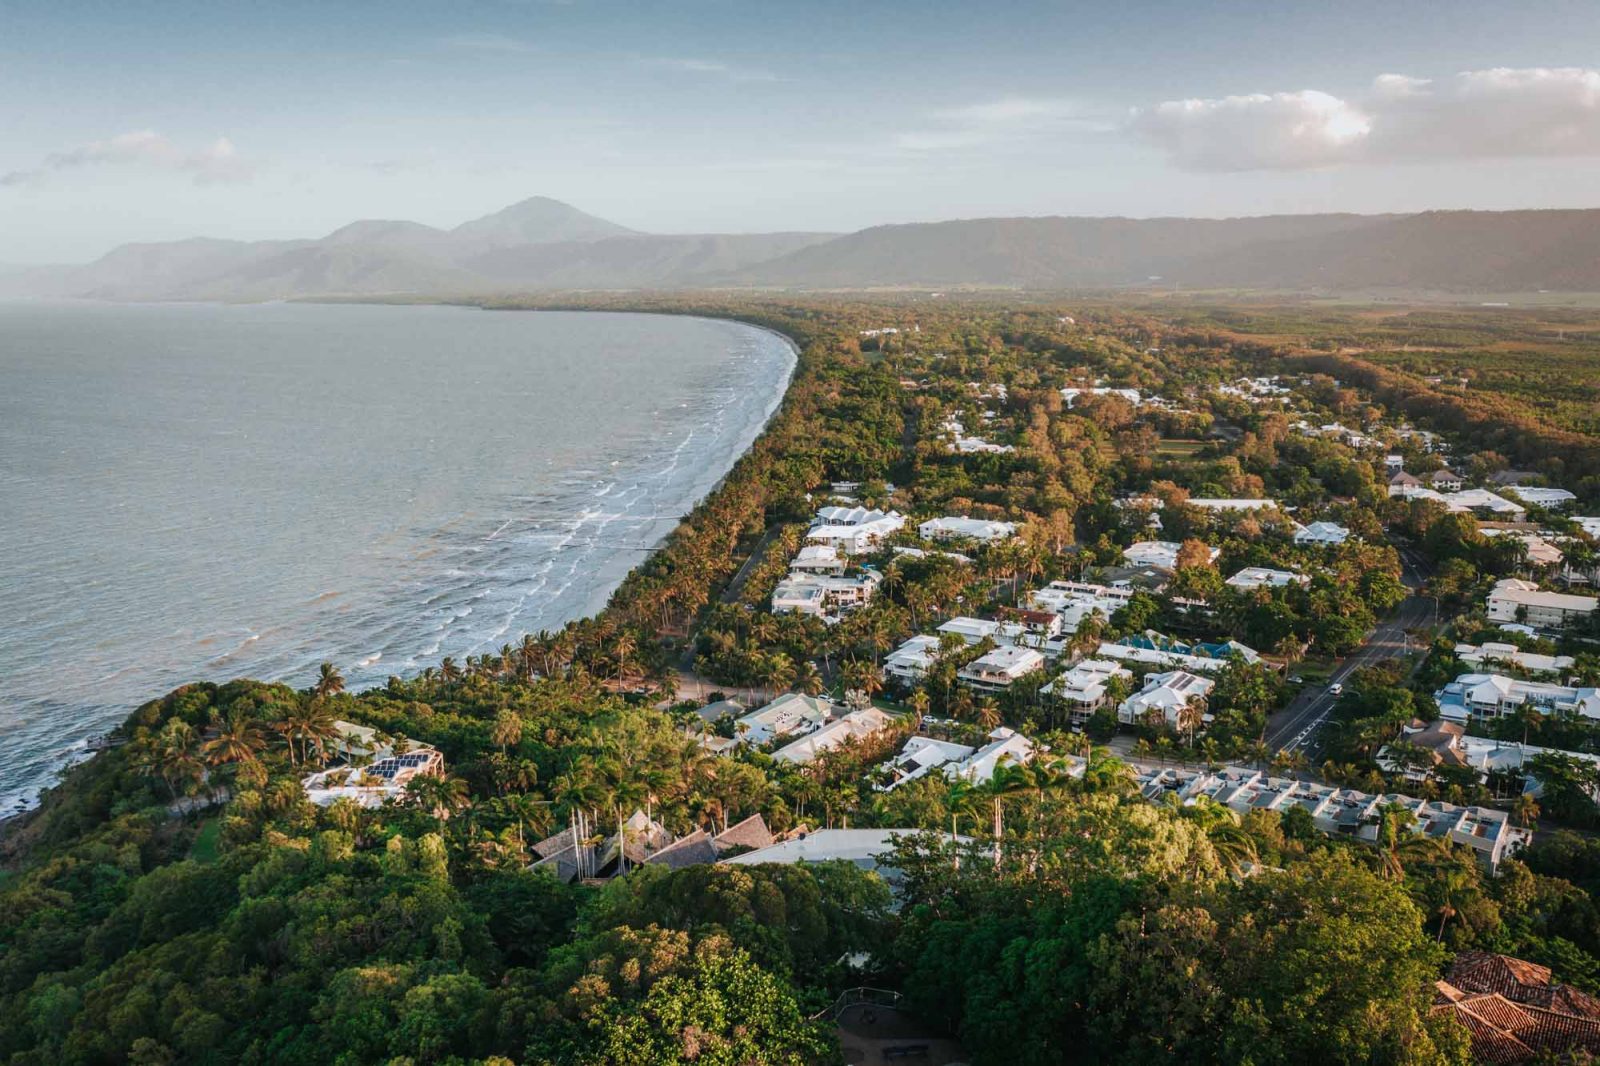 The Best Things To Do in Port Douglas, Australia